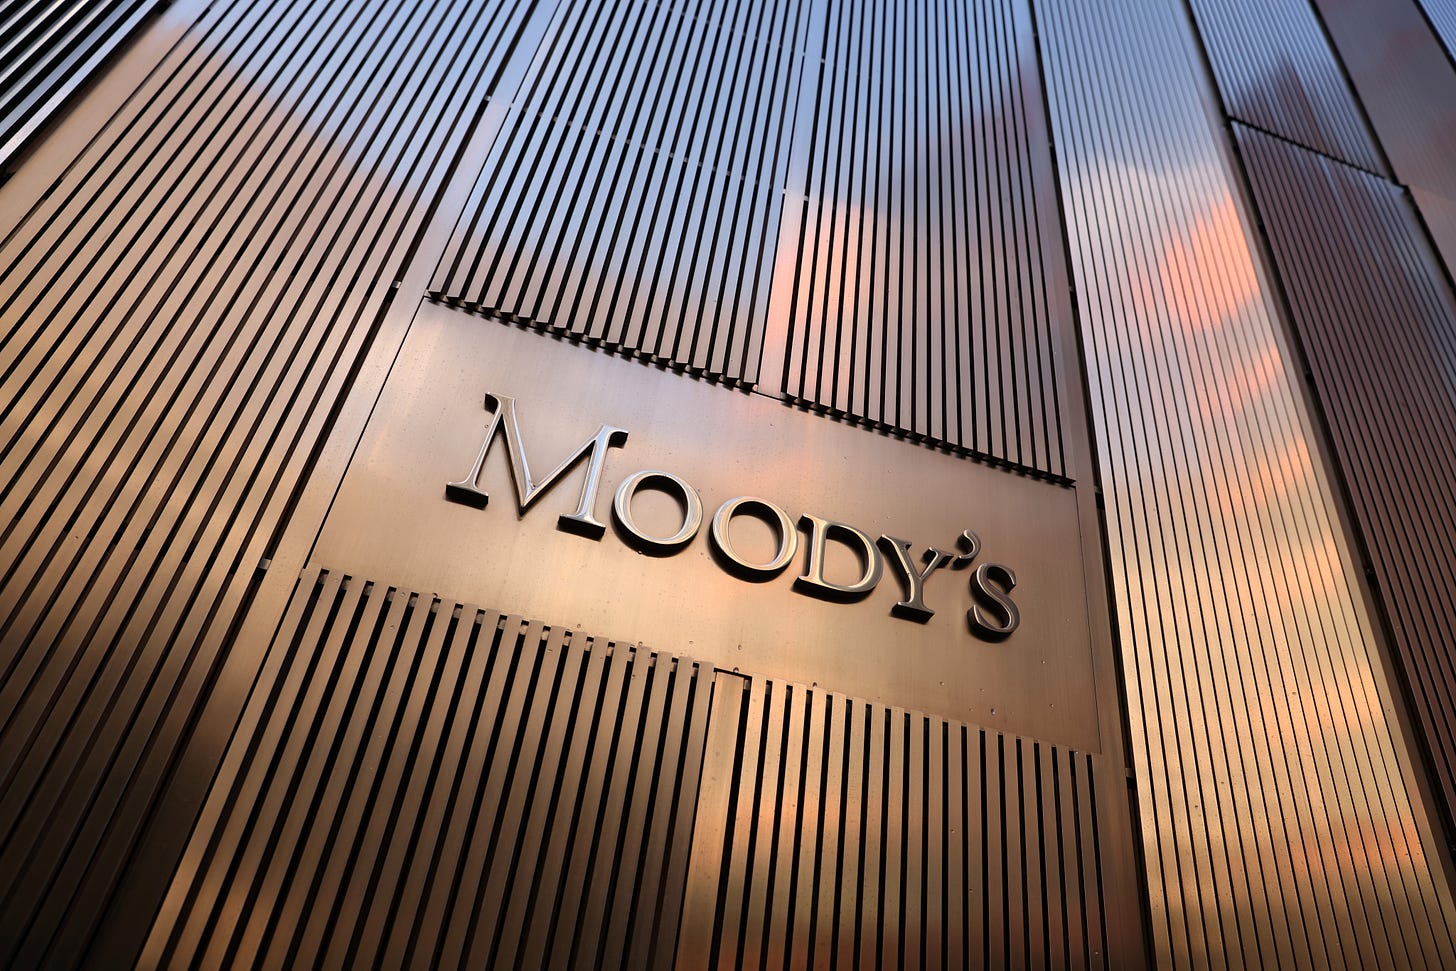 Moody's closing its consulting business in China, cutting staff -sources |  Reuters